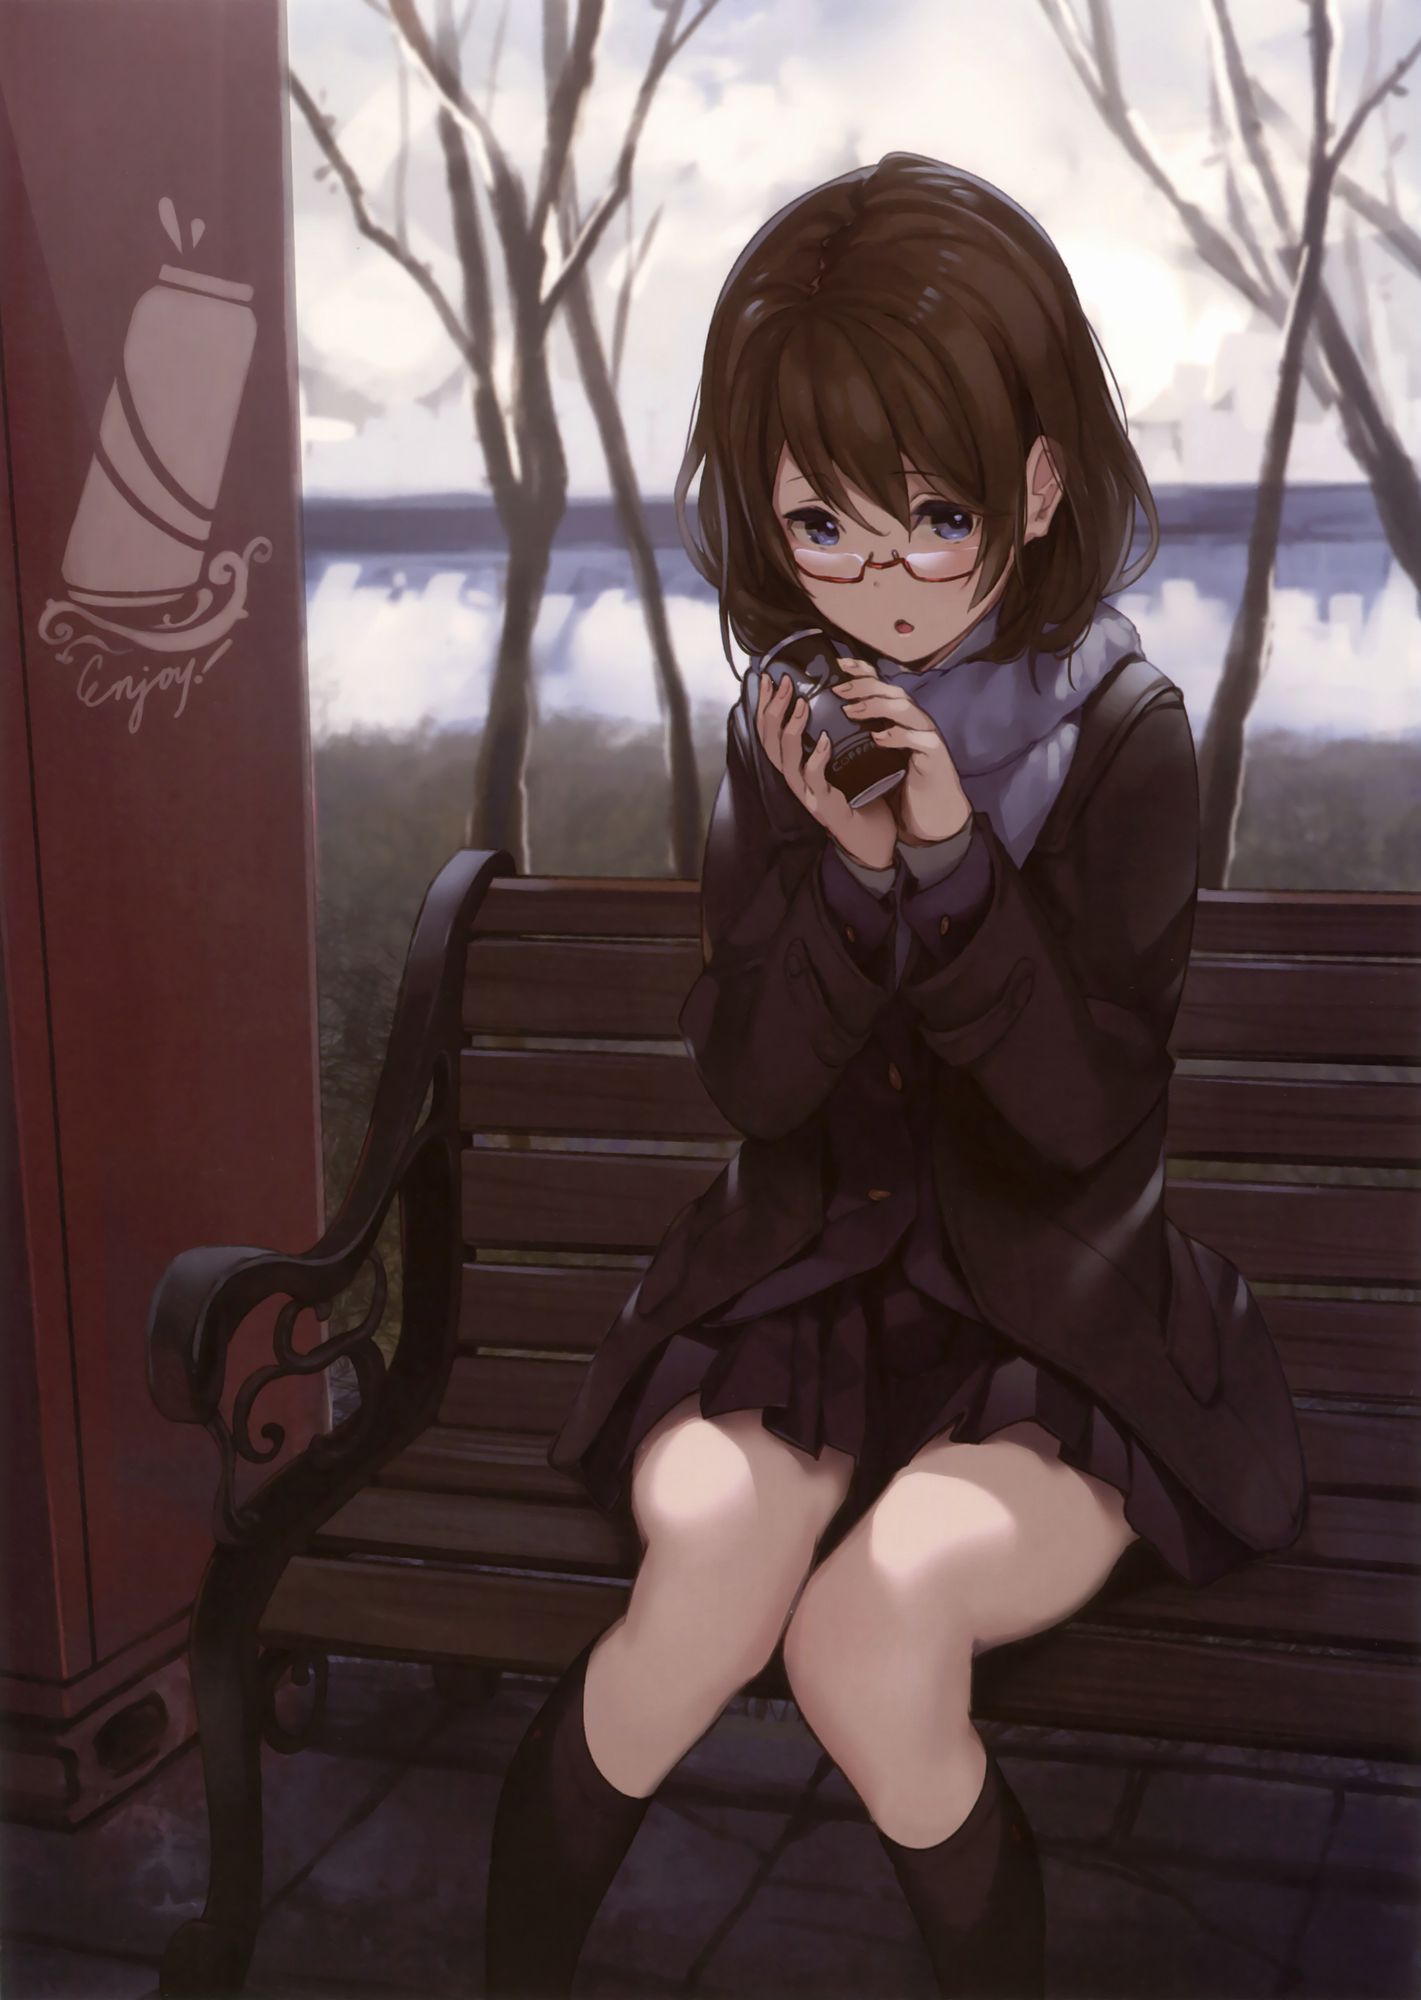 [2nd] Cute Glasses Daughter Secondary Image Part 45 [Glasses Daughter Non-Erotic] 31